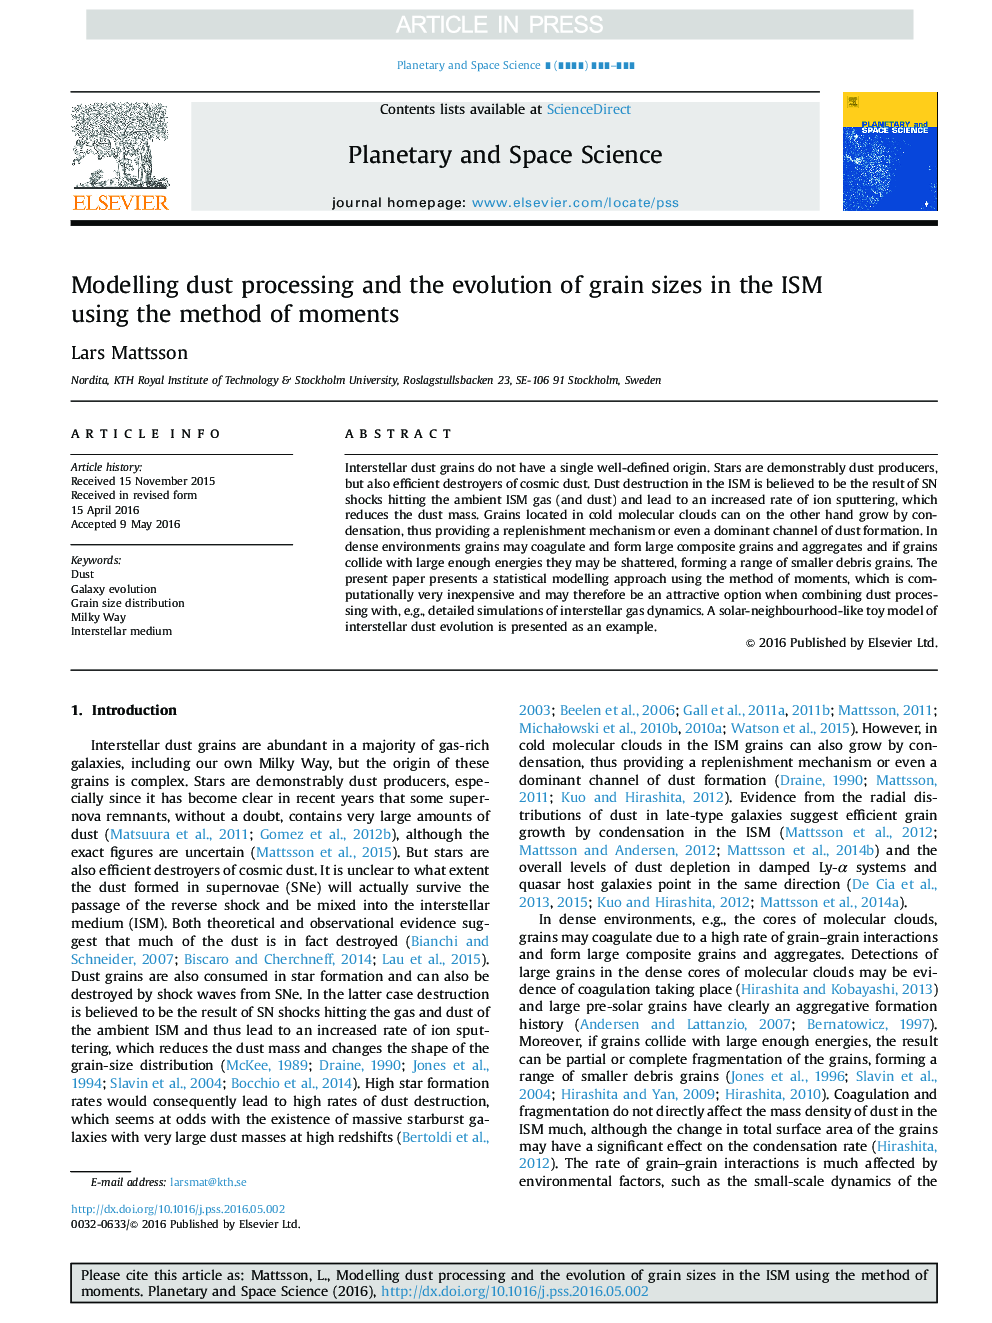 Modelling dust processing and the evolution of grain sizes in the ISM using the method of moments